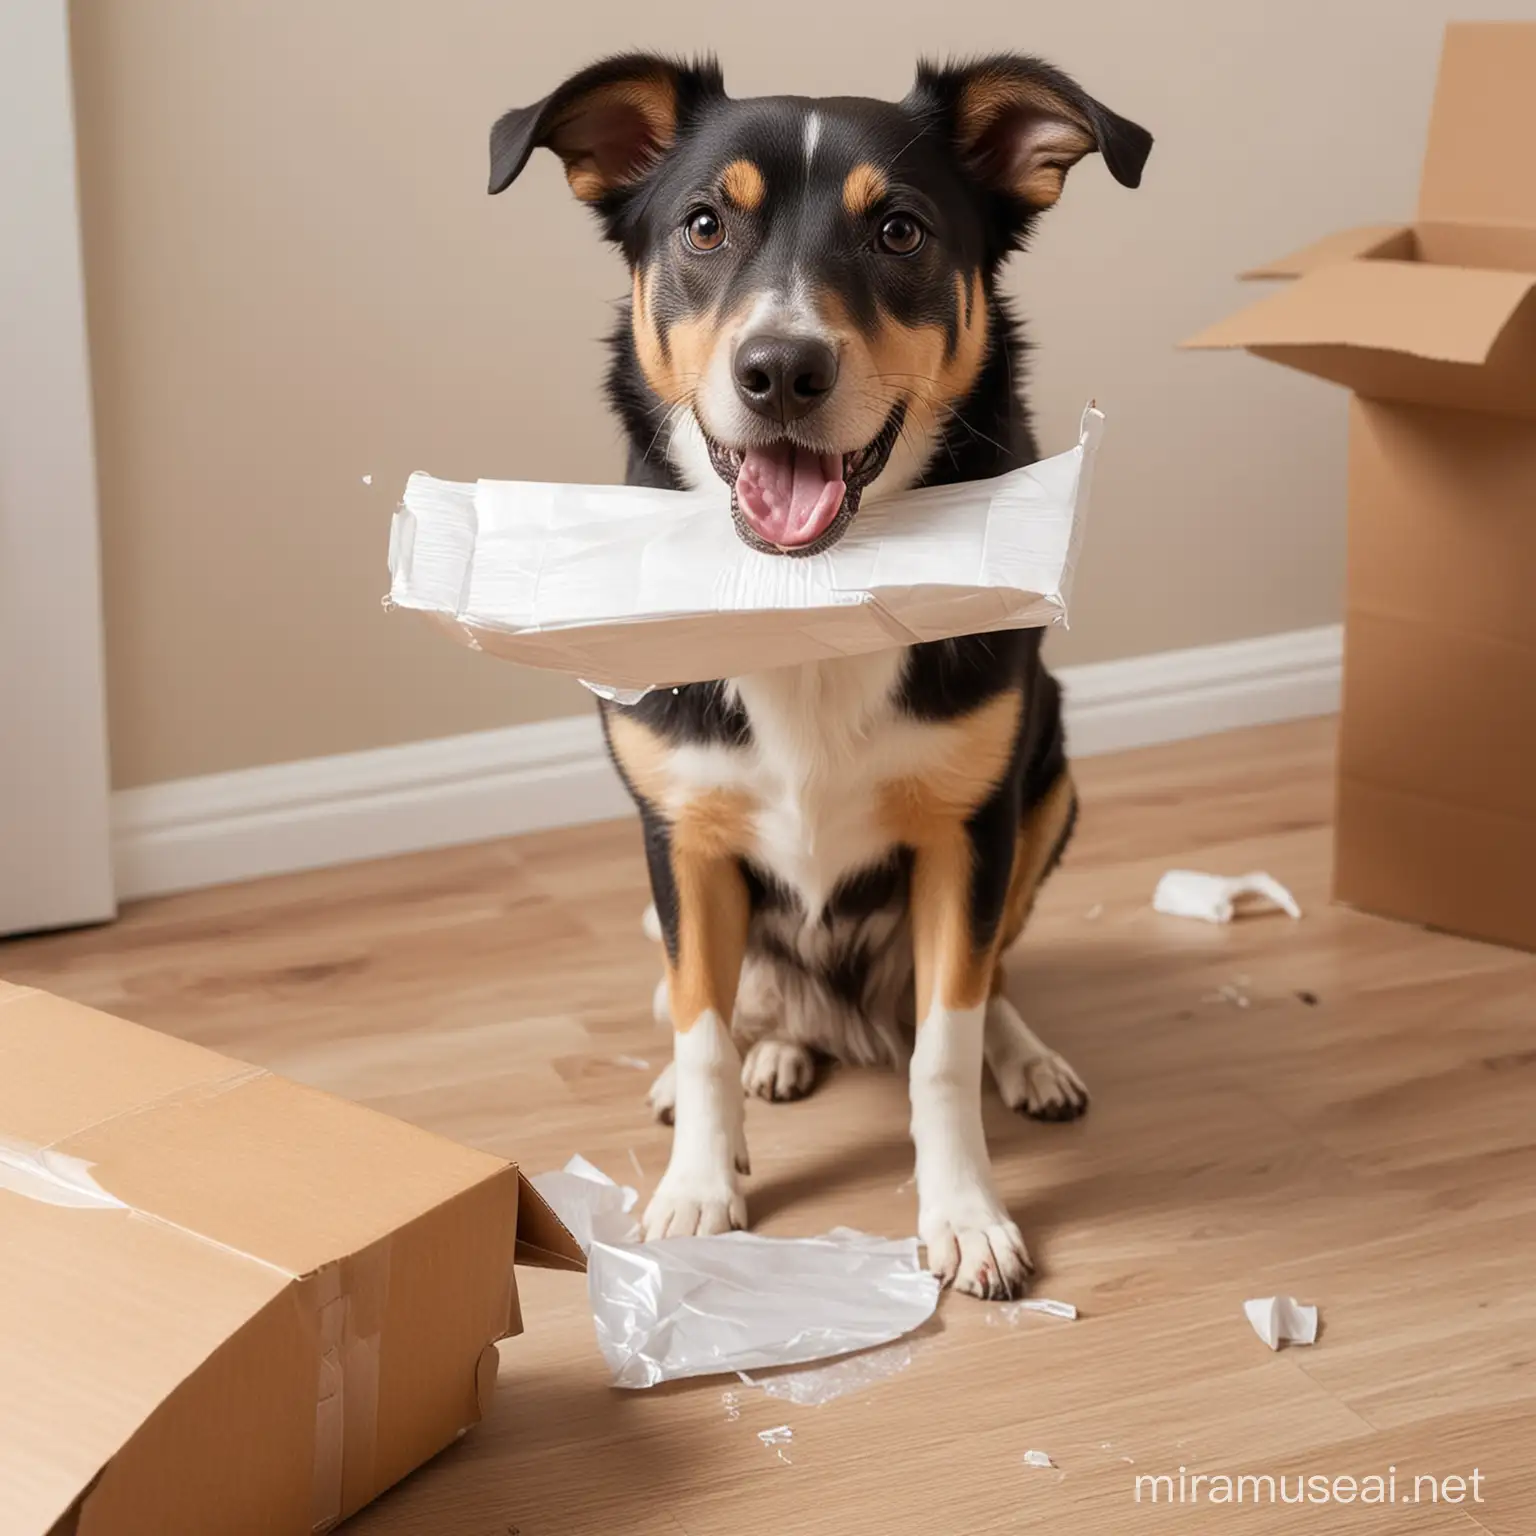 Excited Dog Unwrapping a Parcel with Joyful Anticipation